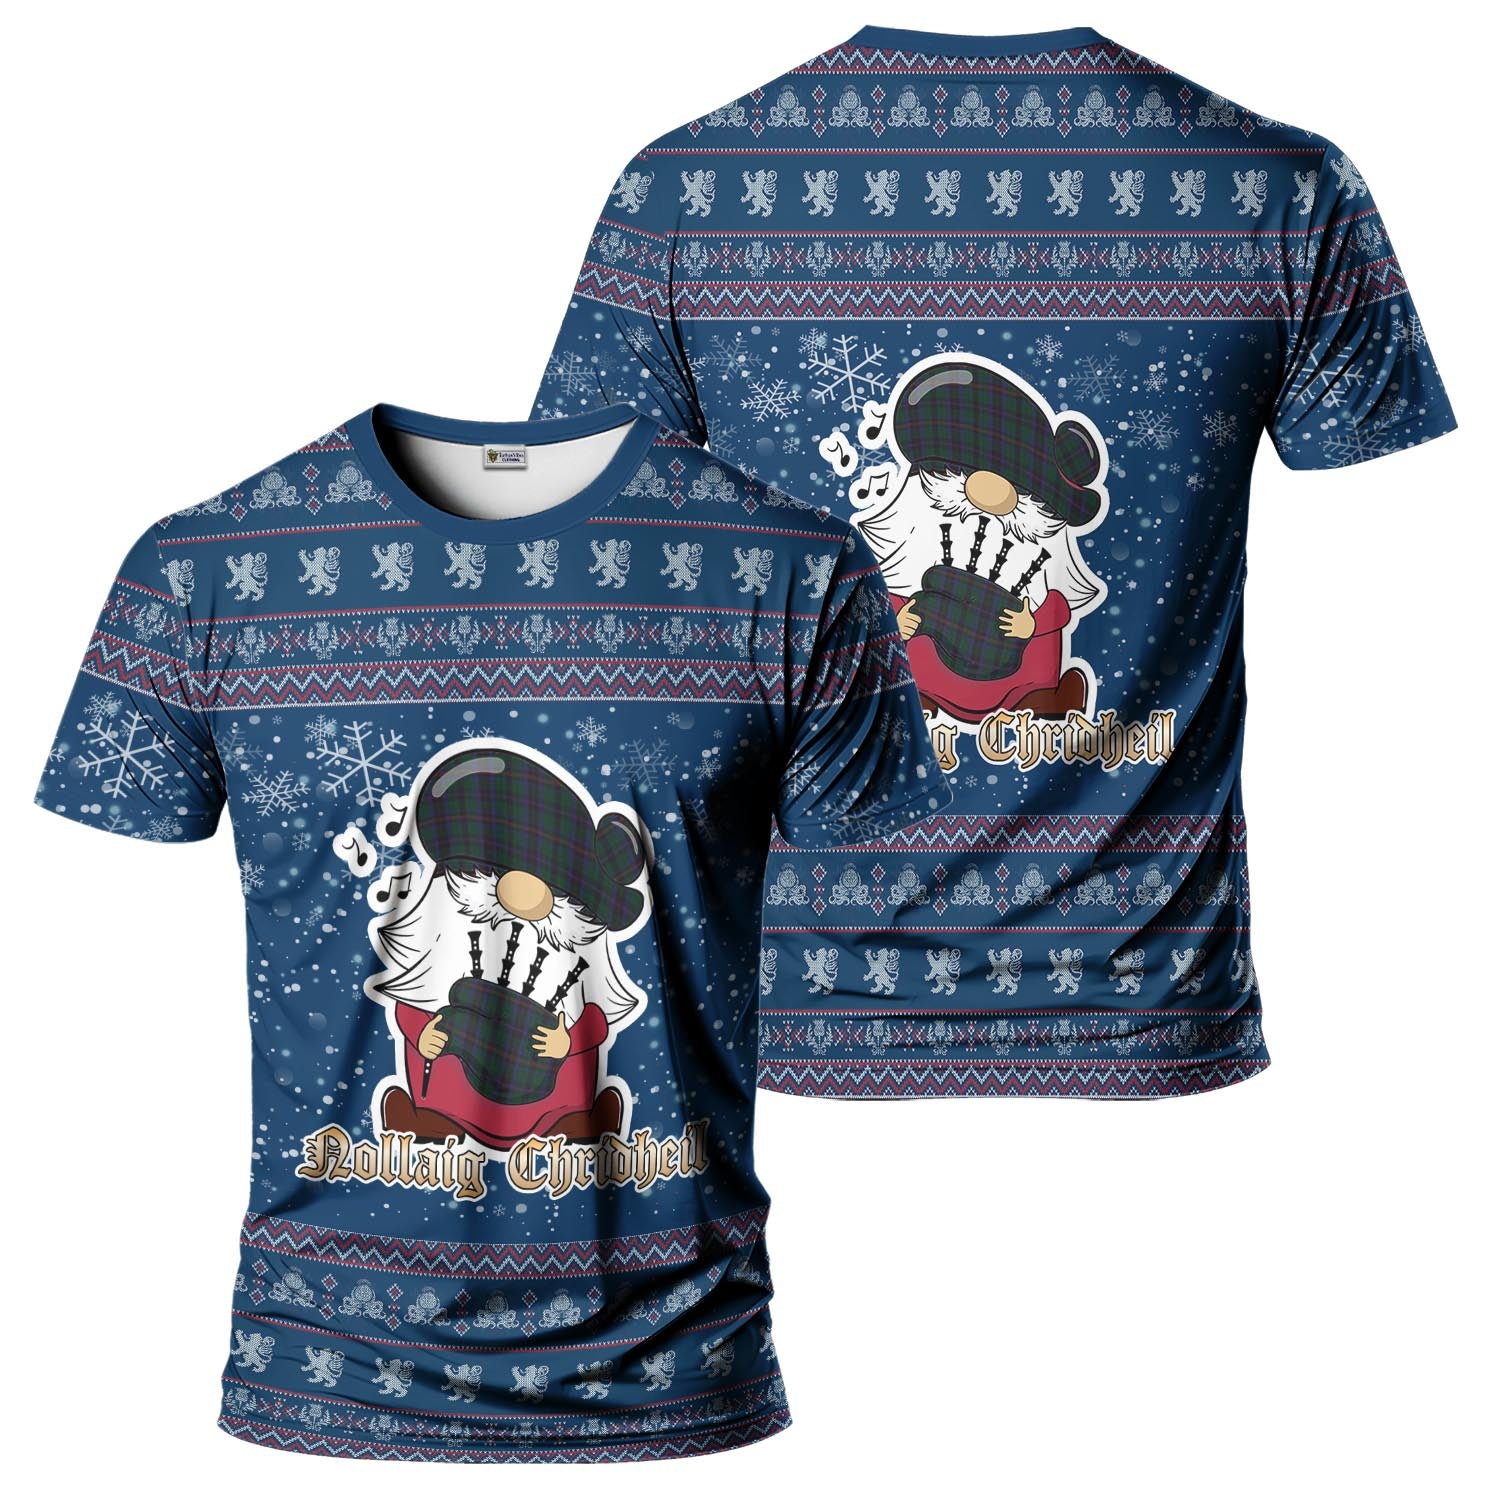 Phillips of Wales Clan Christmas Family T-Shirt with Funny Gnome Playing Bagpipes Kid's Shirt Blue - Tartanvibesclothing